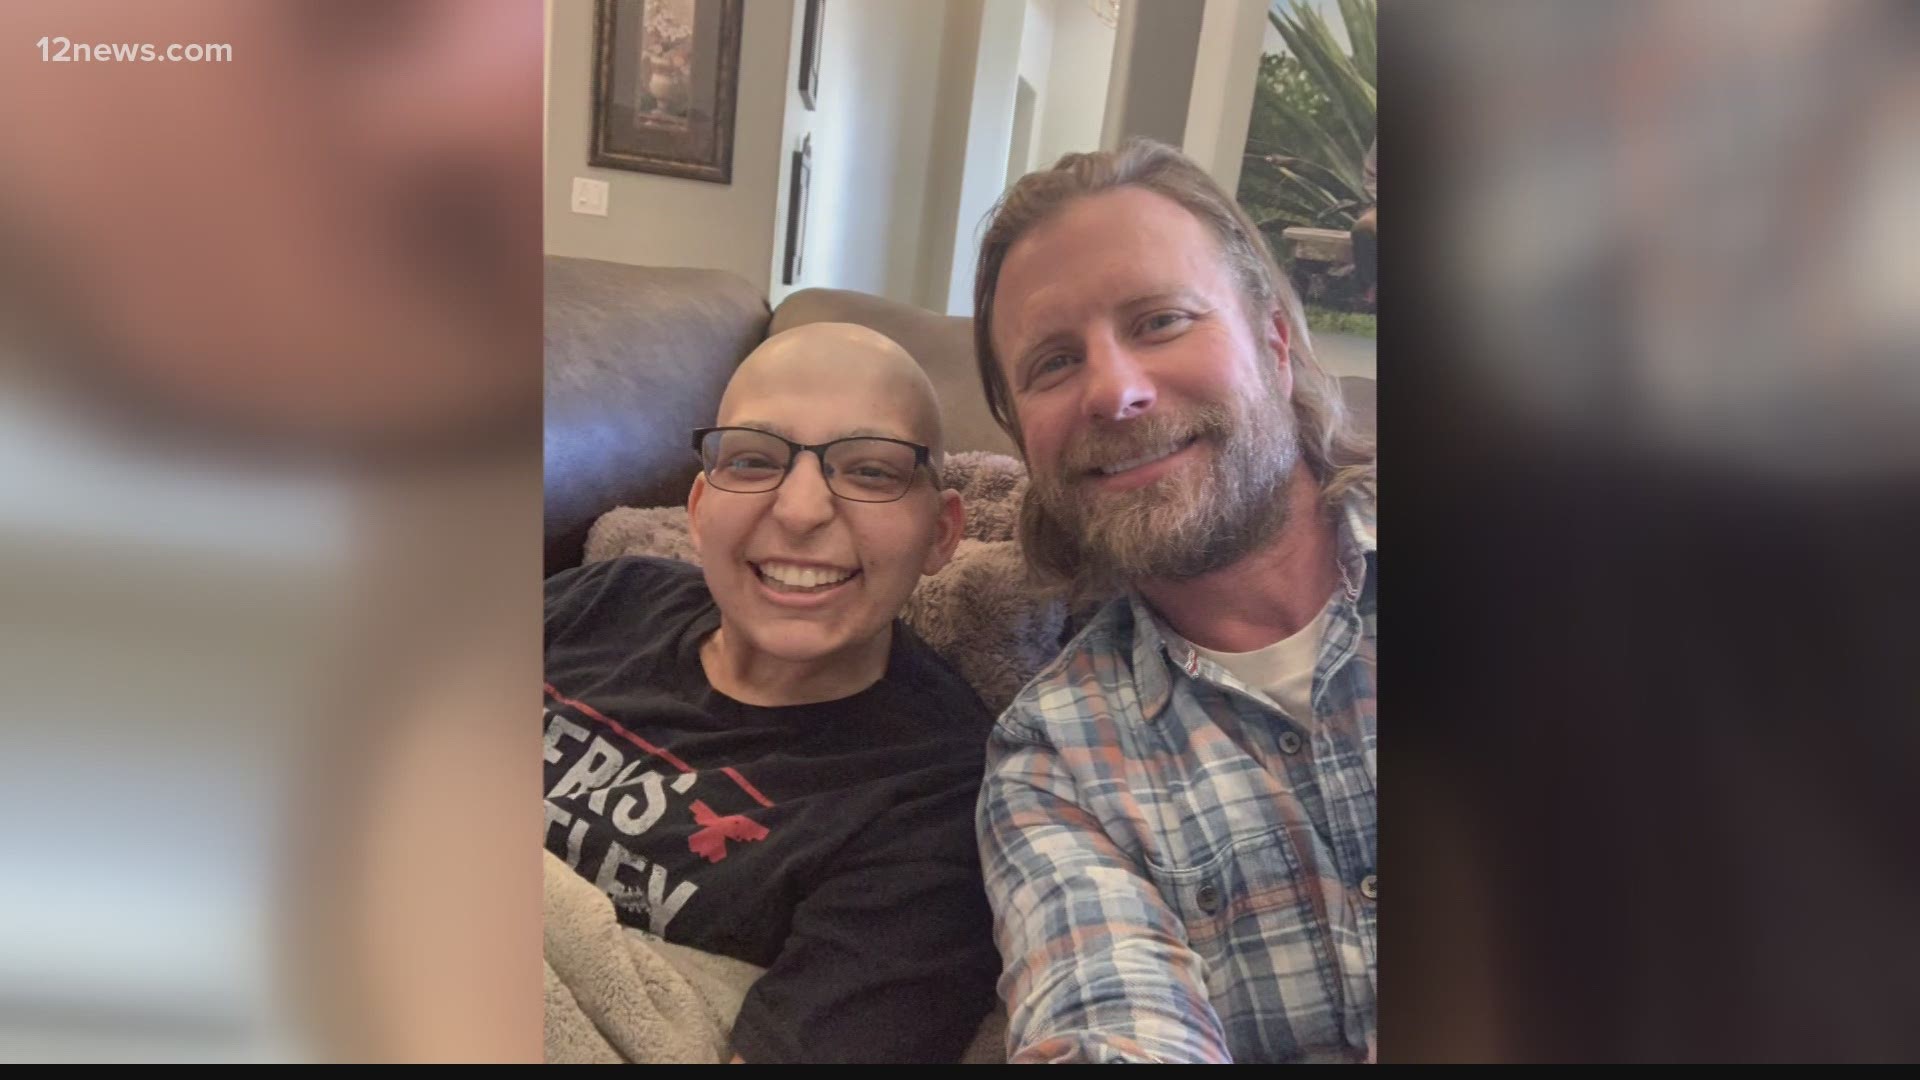 It's been a tough six months for a Valley woman battling cancer. A visit and private concert from Valley native Dierks Bentley, however, lifted her spirits!